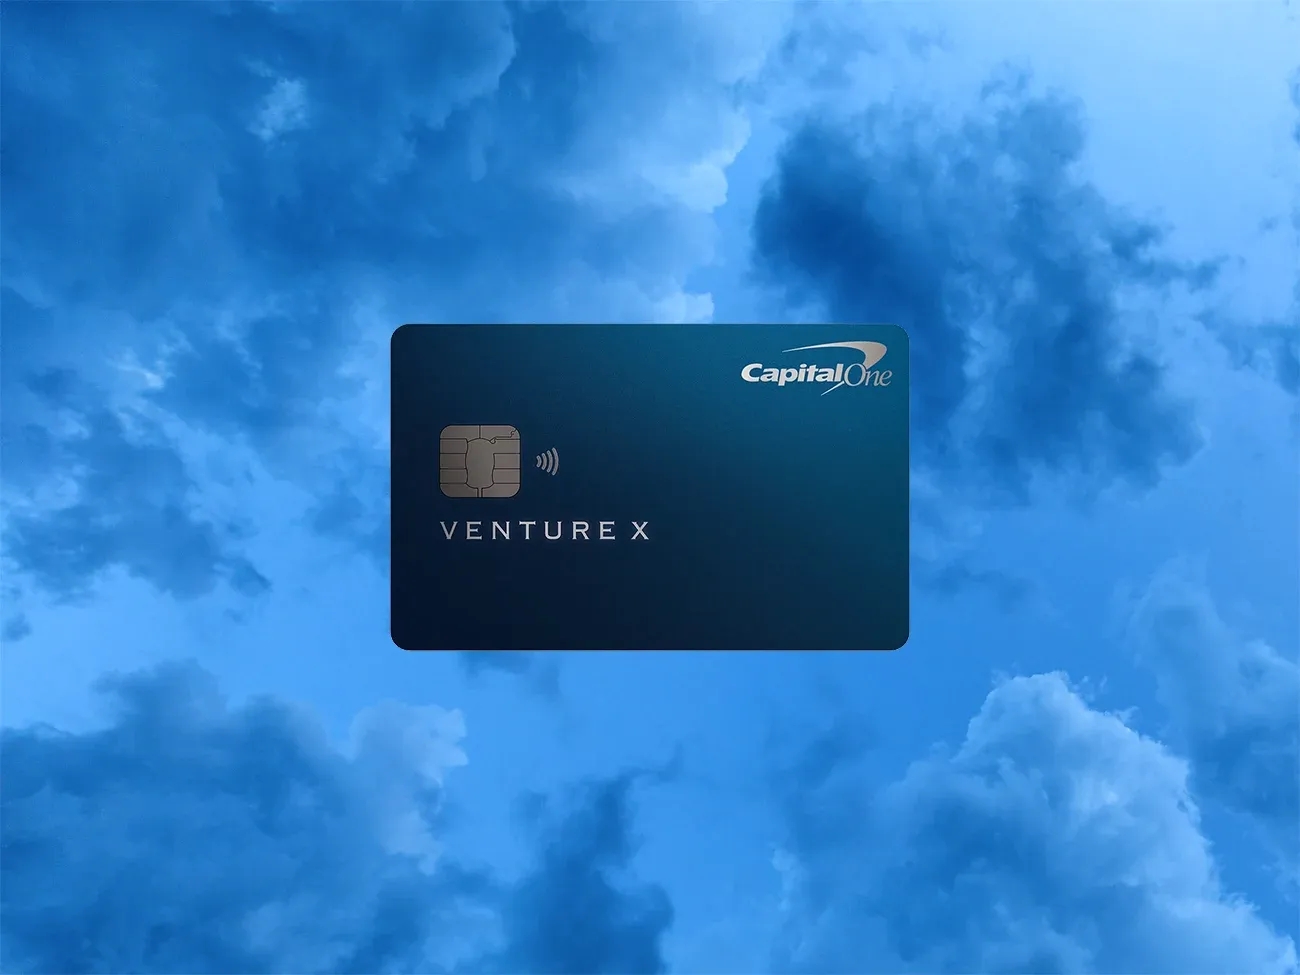 A photograph of the Capital One Venture X credit card